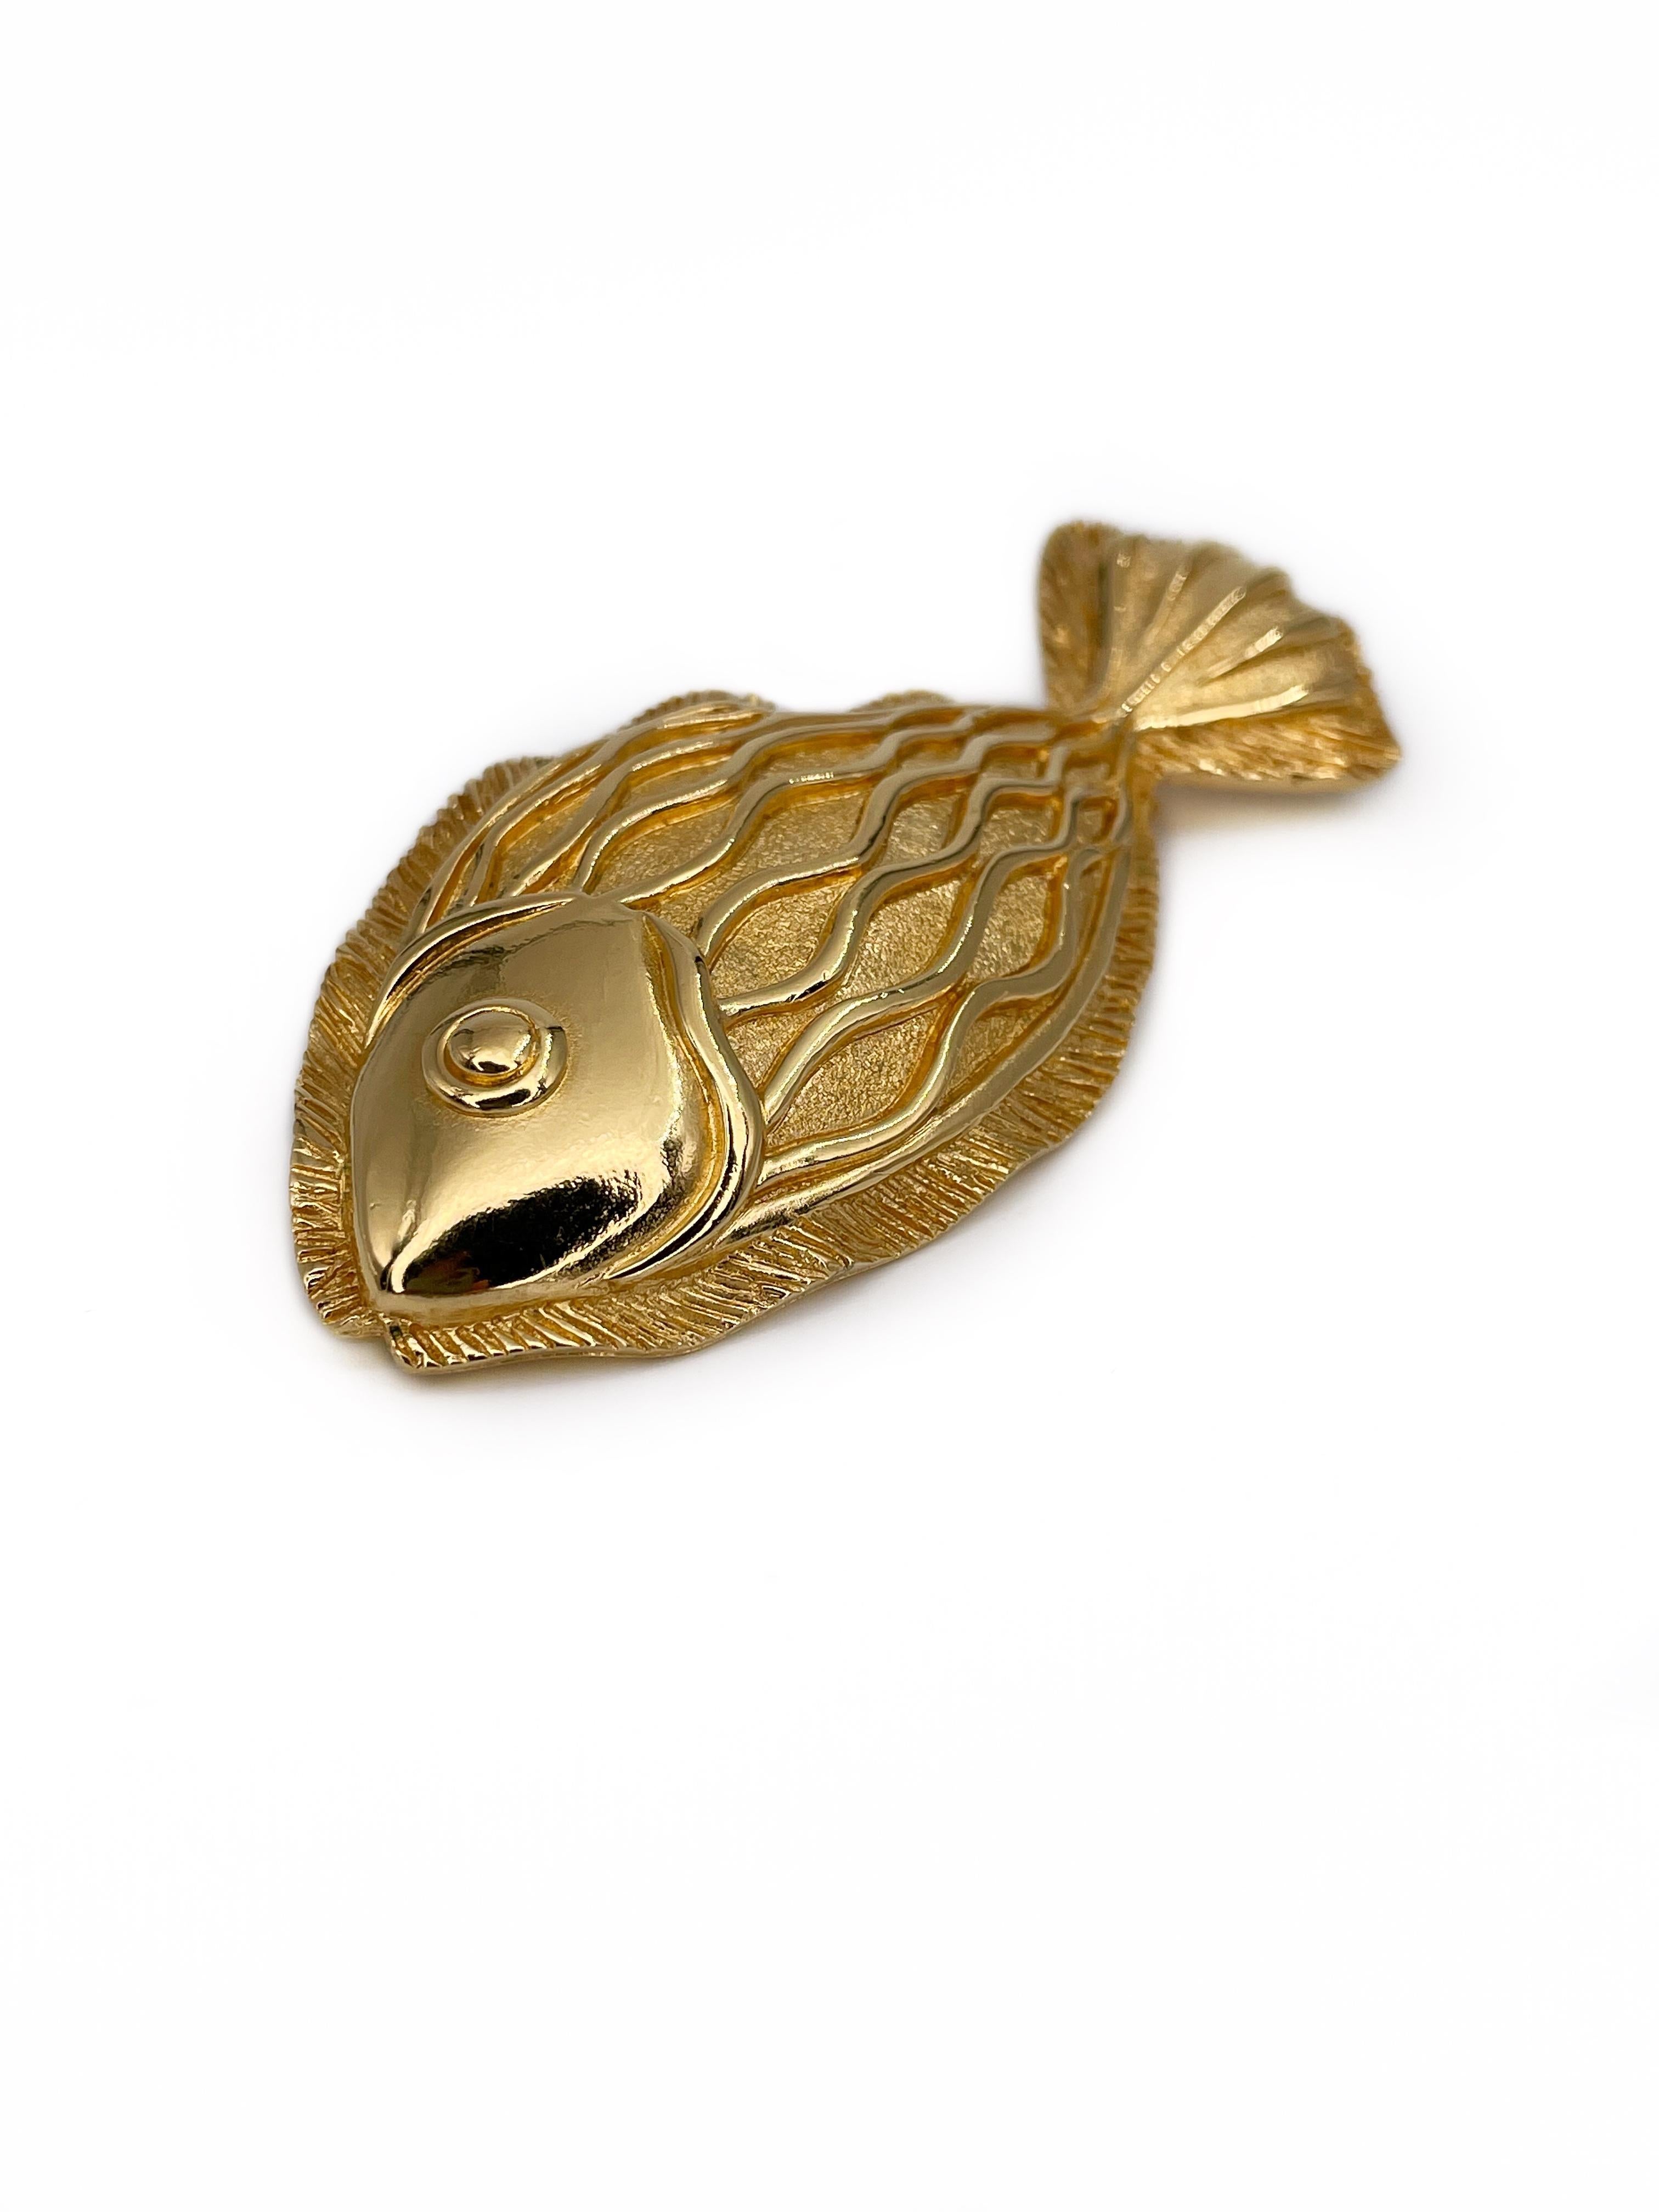 This is a beautifully crafted gold tone figural fish pin brooch designed by Lanvin in 1970’s. This piece is gold plated. 

Signature: “LANVIN. GERMANY” (shown in photos).

Size: 8x3.7cm

———

If you have any questions, please feel free to ask. We